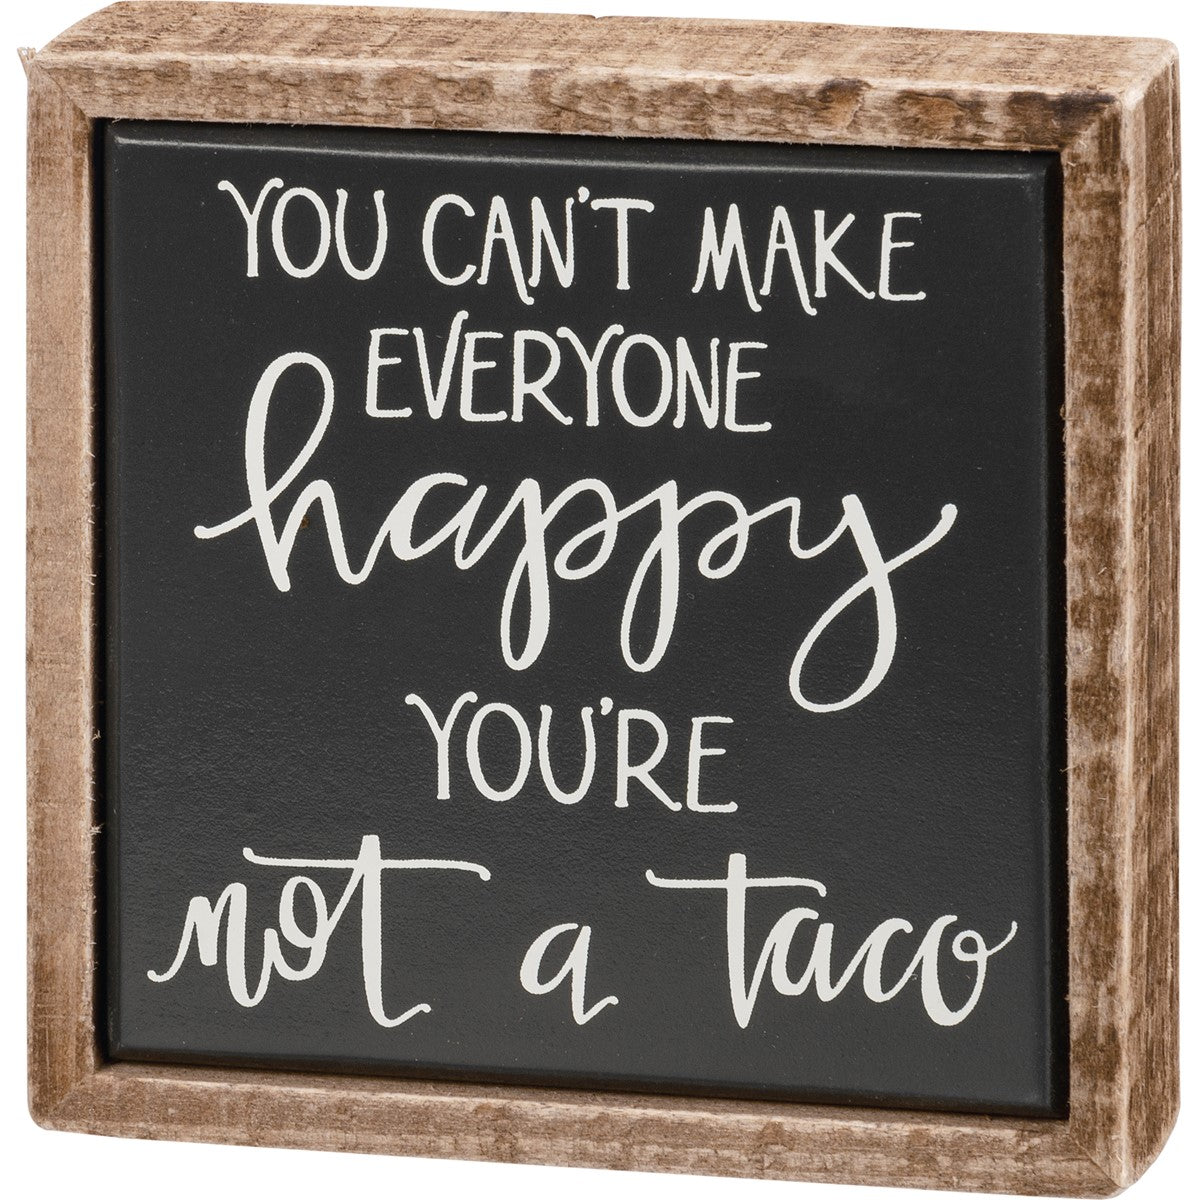 You're Not A Taco Box Sign